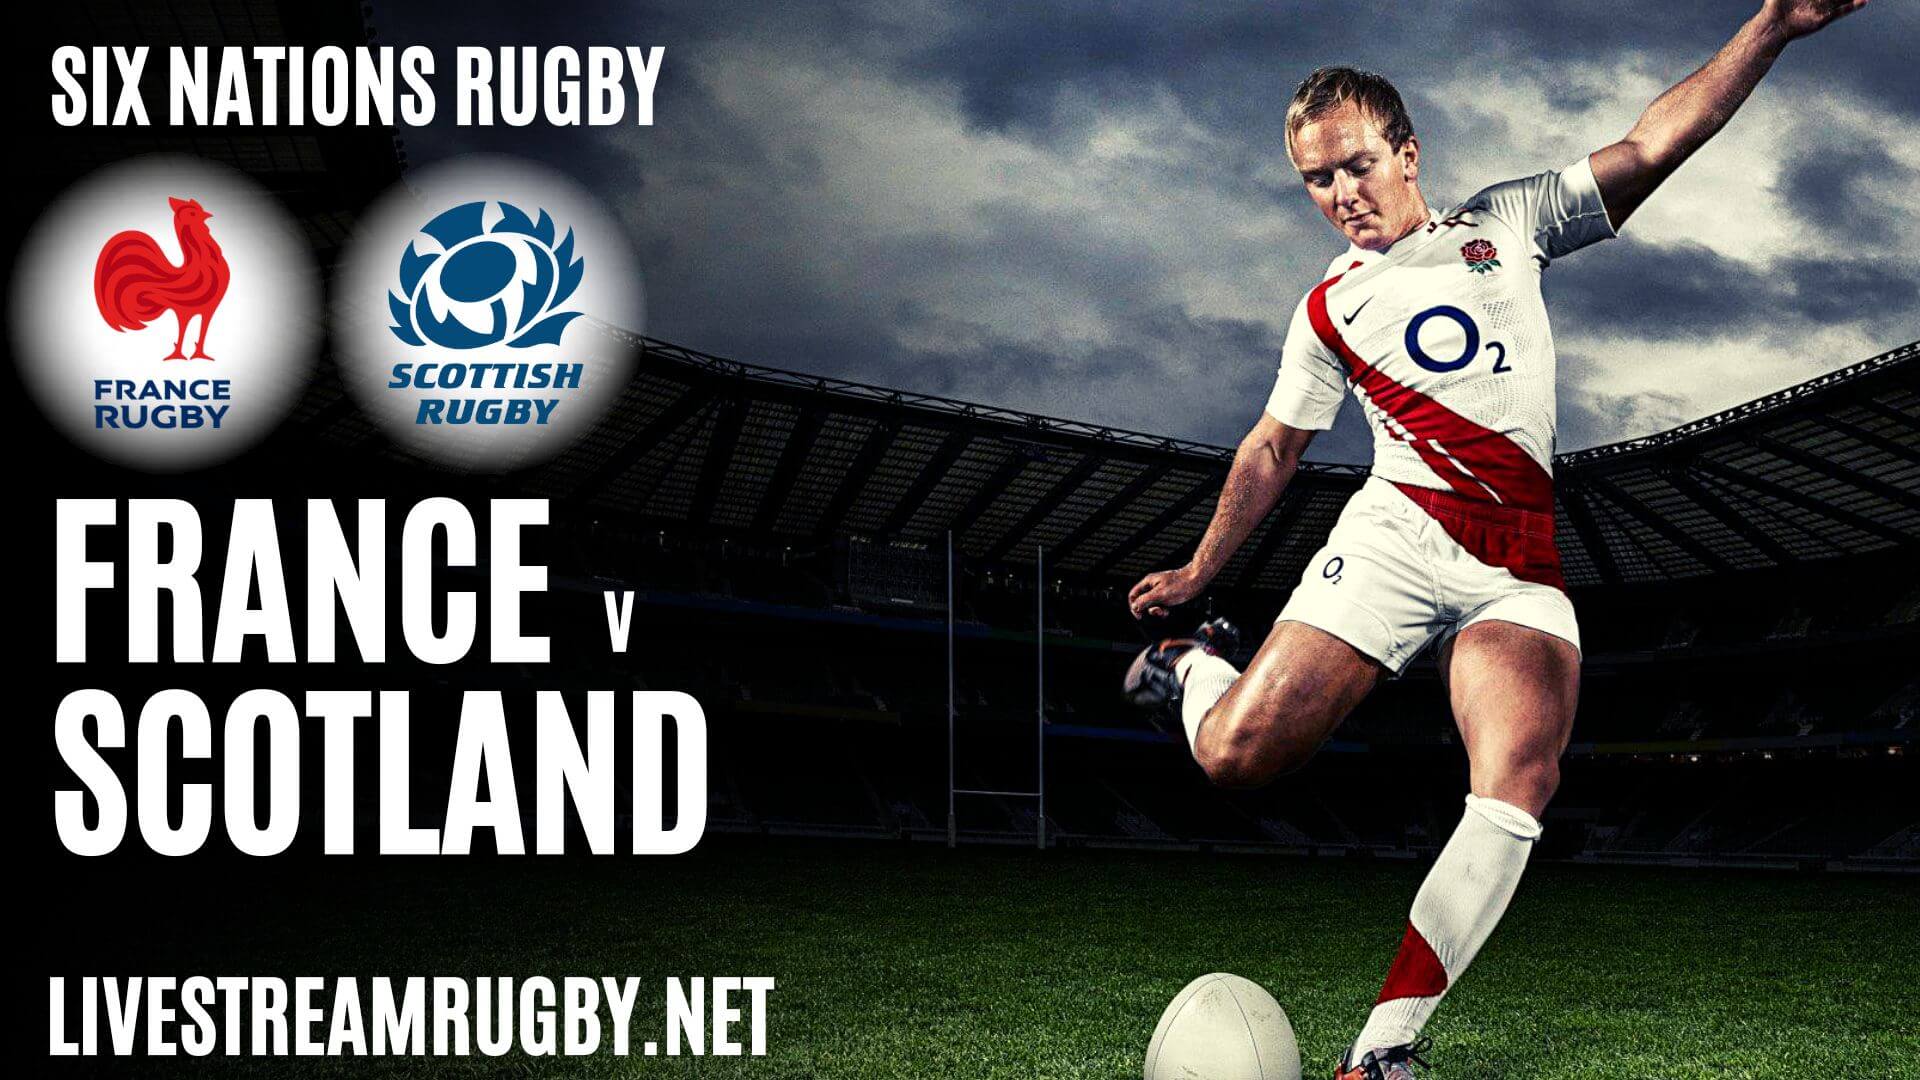 France Vs Scotland Six Nations Rugby Live Stream Online